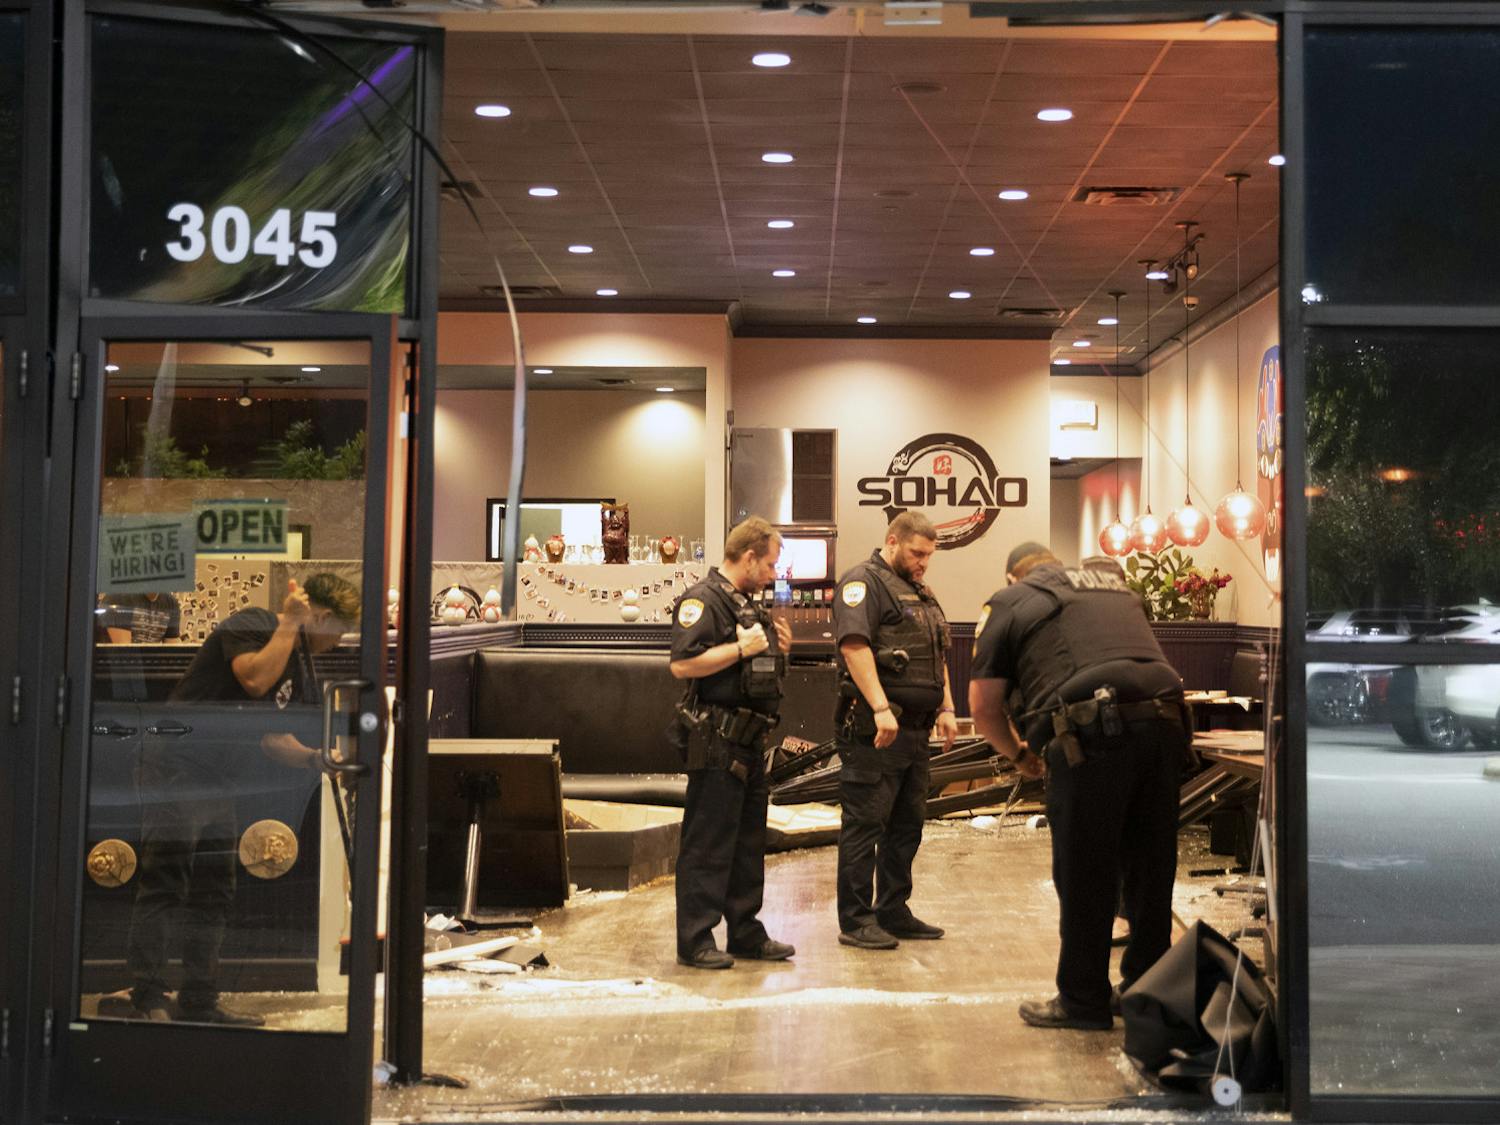 Police officers investigate the area and help clean broken glass from the floor of SOHAO Cafe & Gator Suyaki after a blue Dodge was driven through the front of the restaurant on Monday, May 17, 2021.